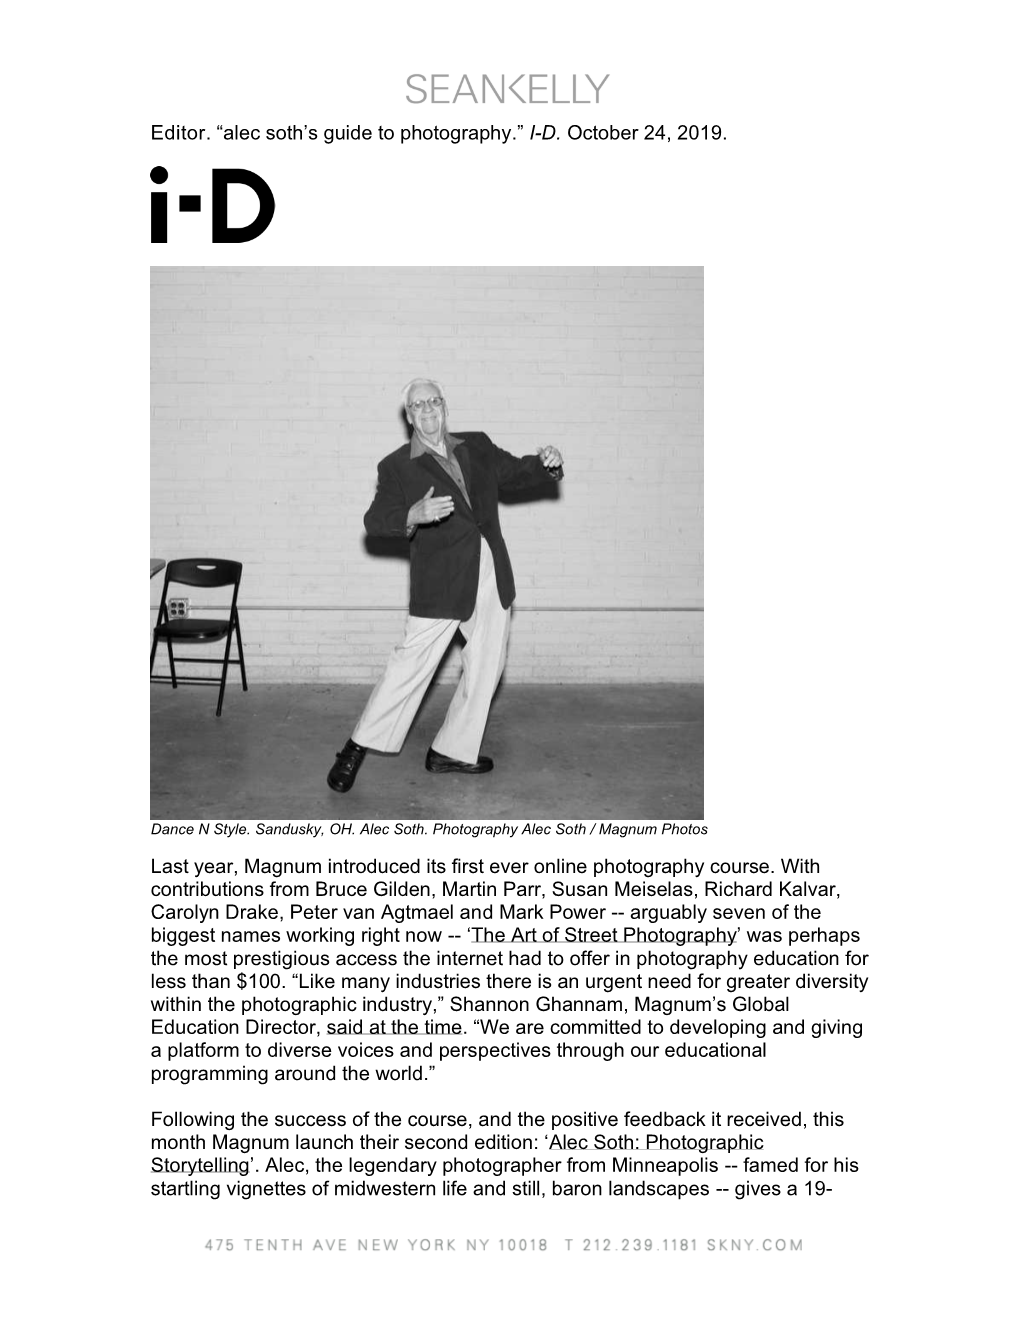 Editor. “Alec Soth's Guide to Photography.” I-D. October 24, 2019